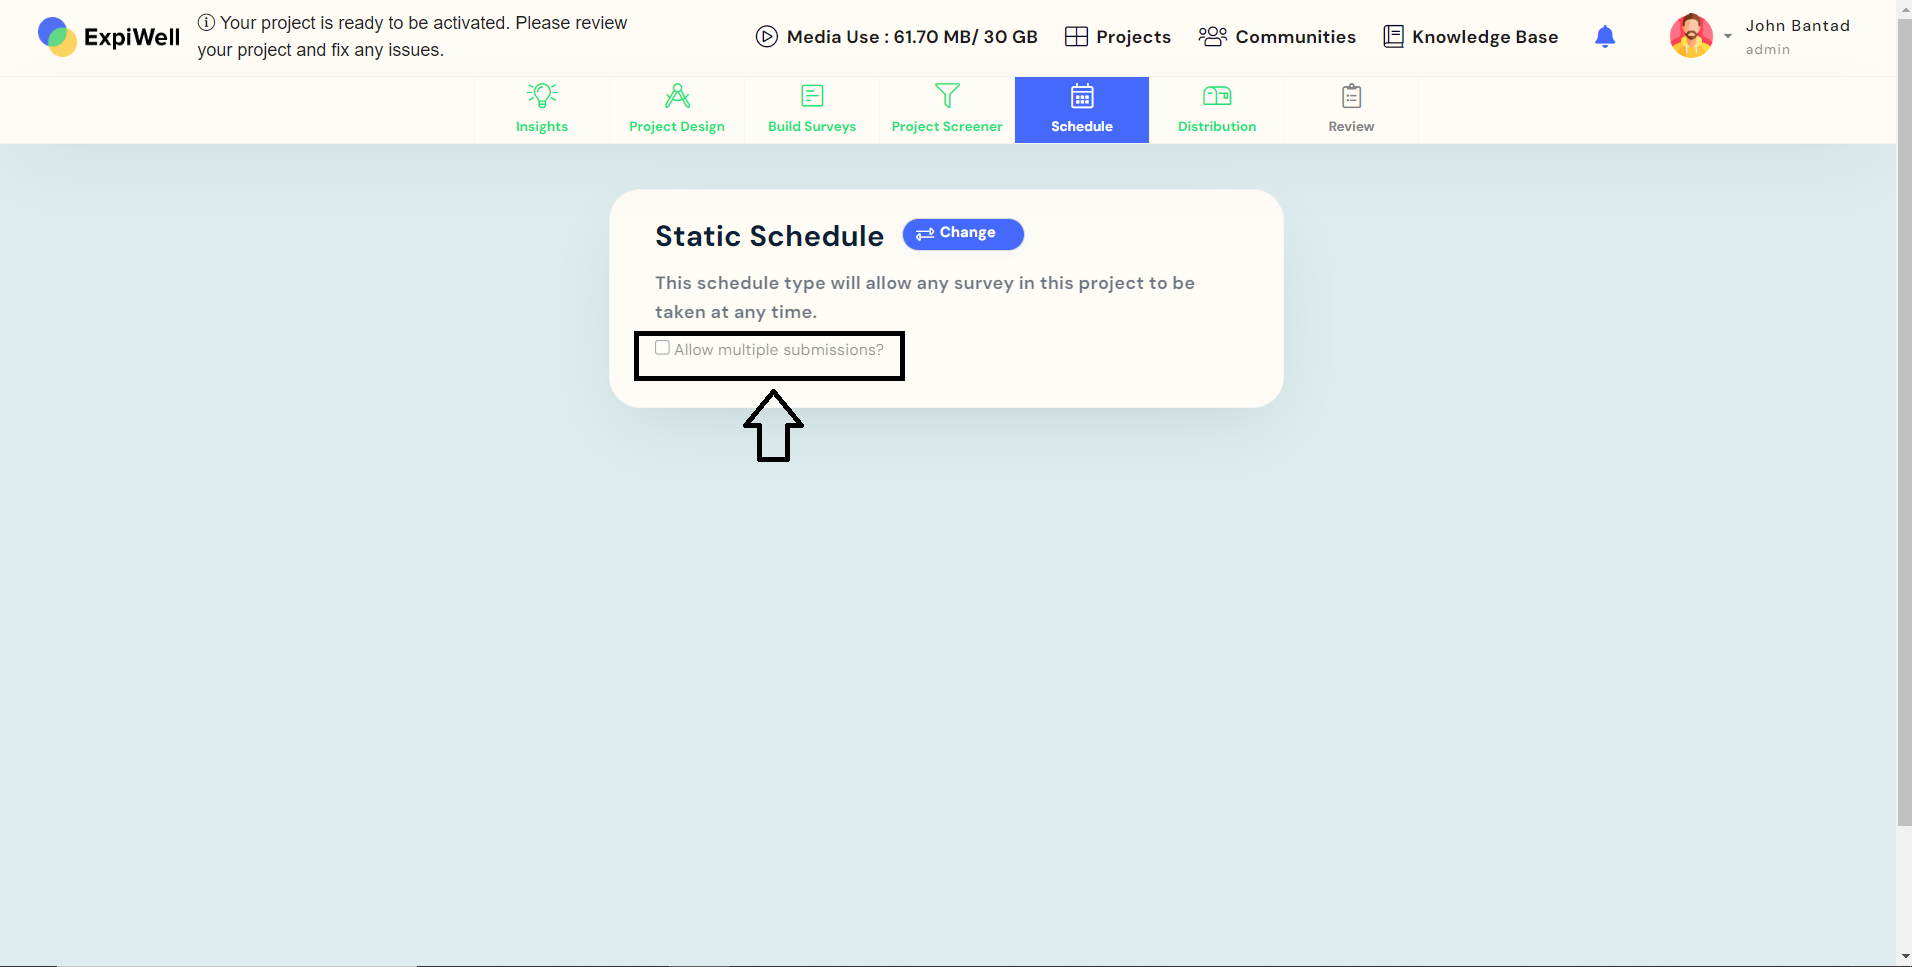 Static Scheduling - single submission